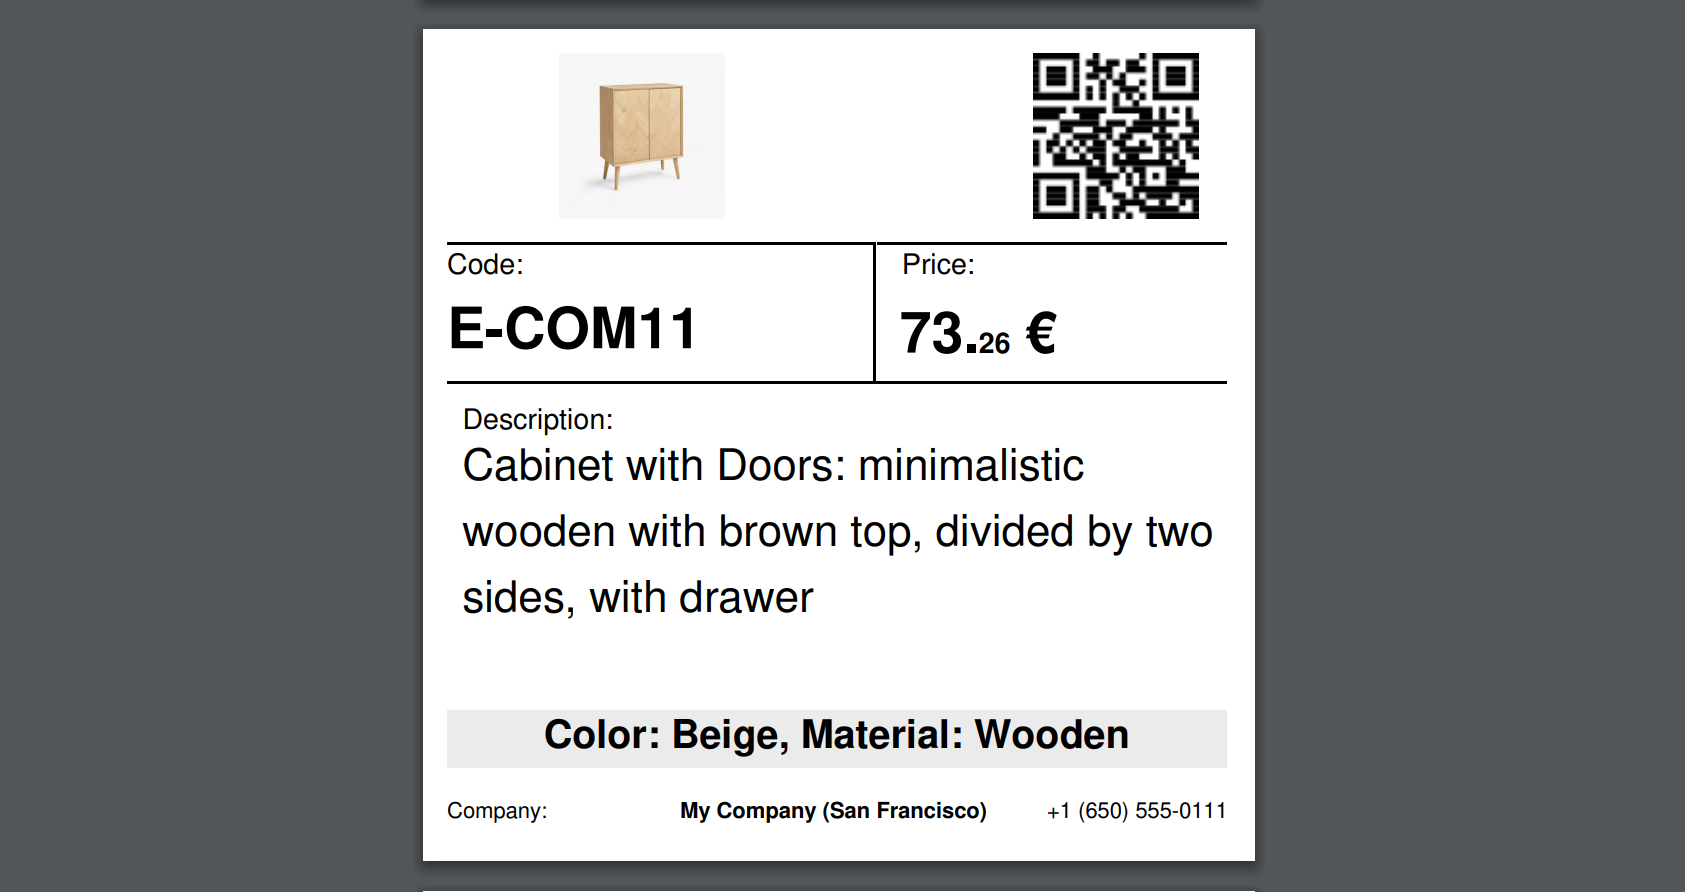 Odoo 15.0 dymo barcode product label 100 x 100 mm